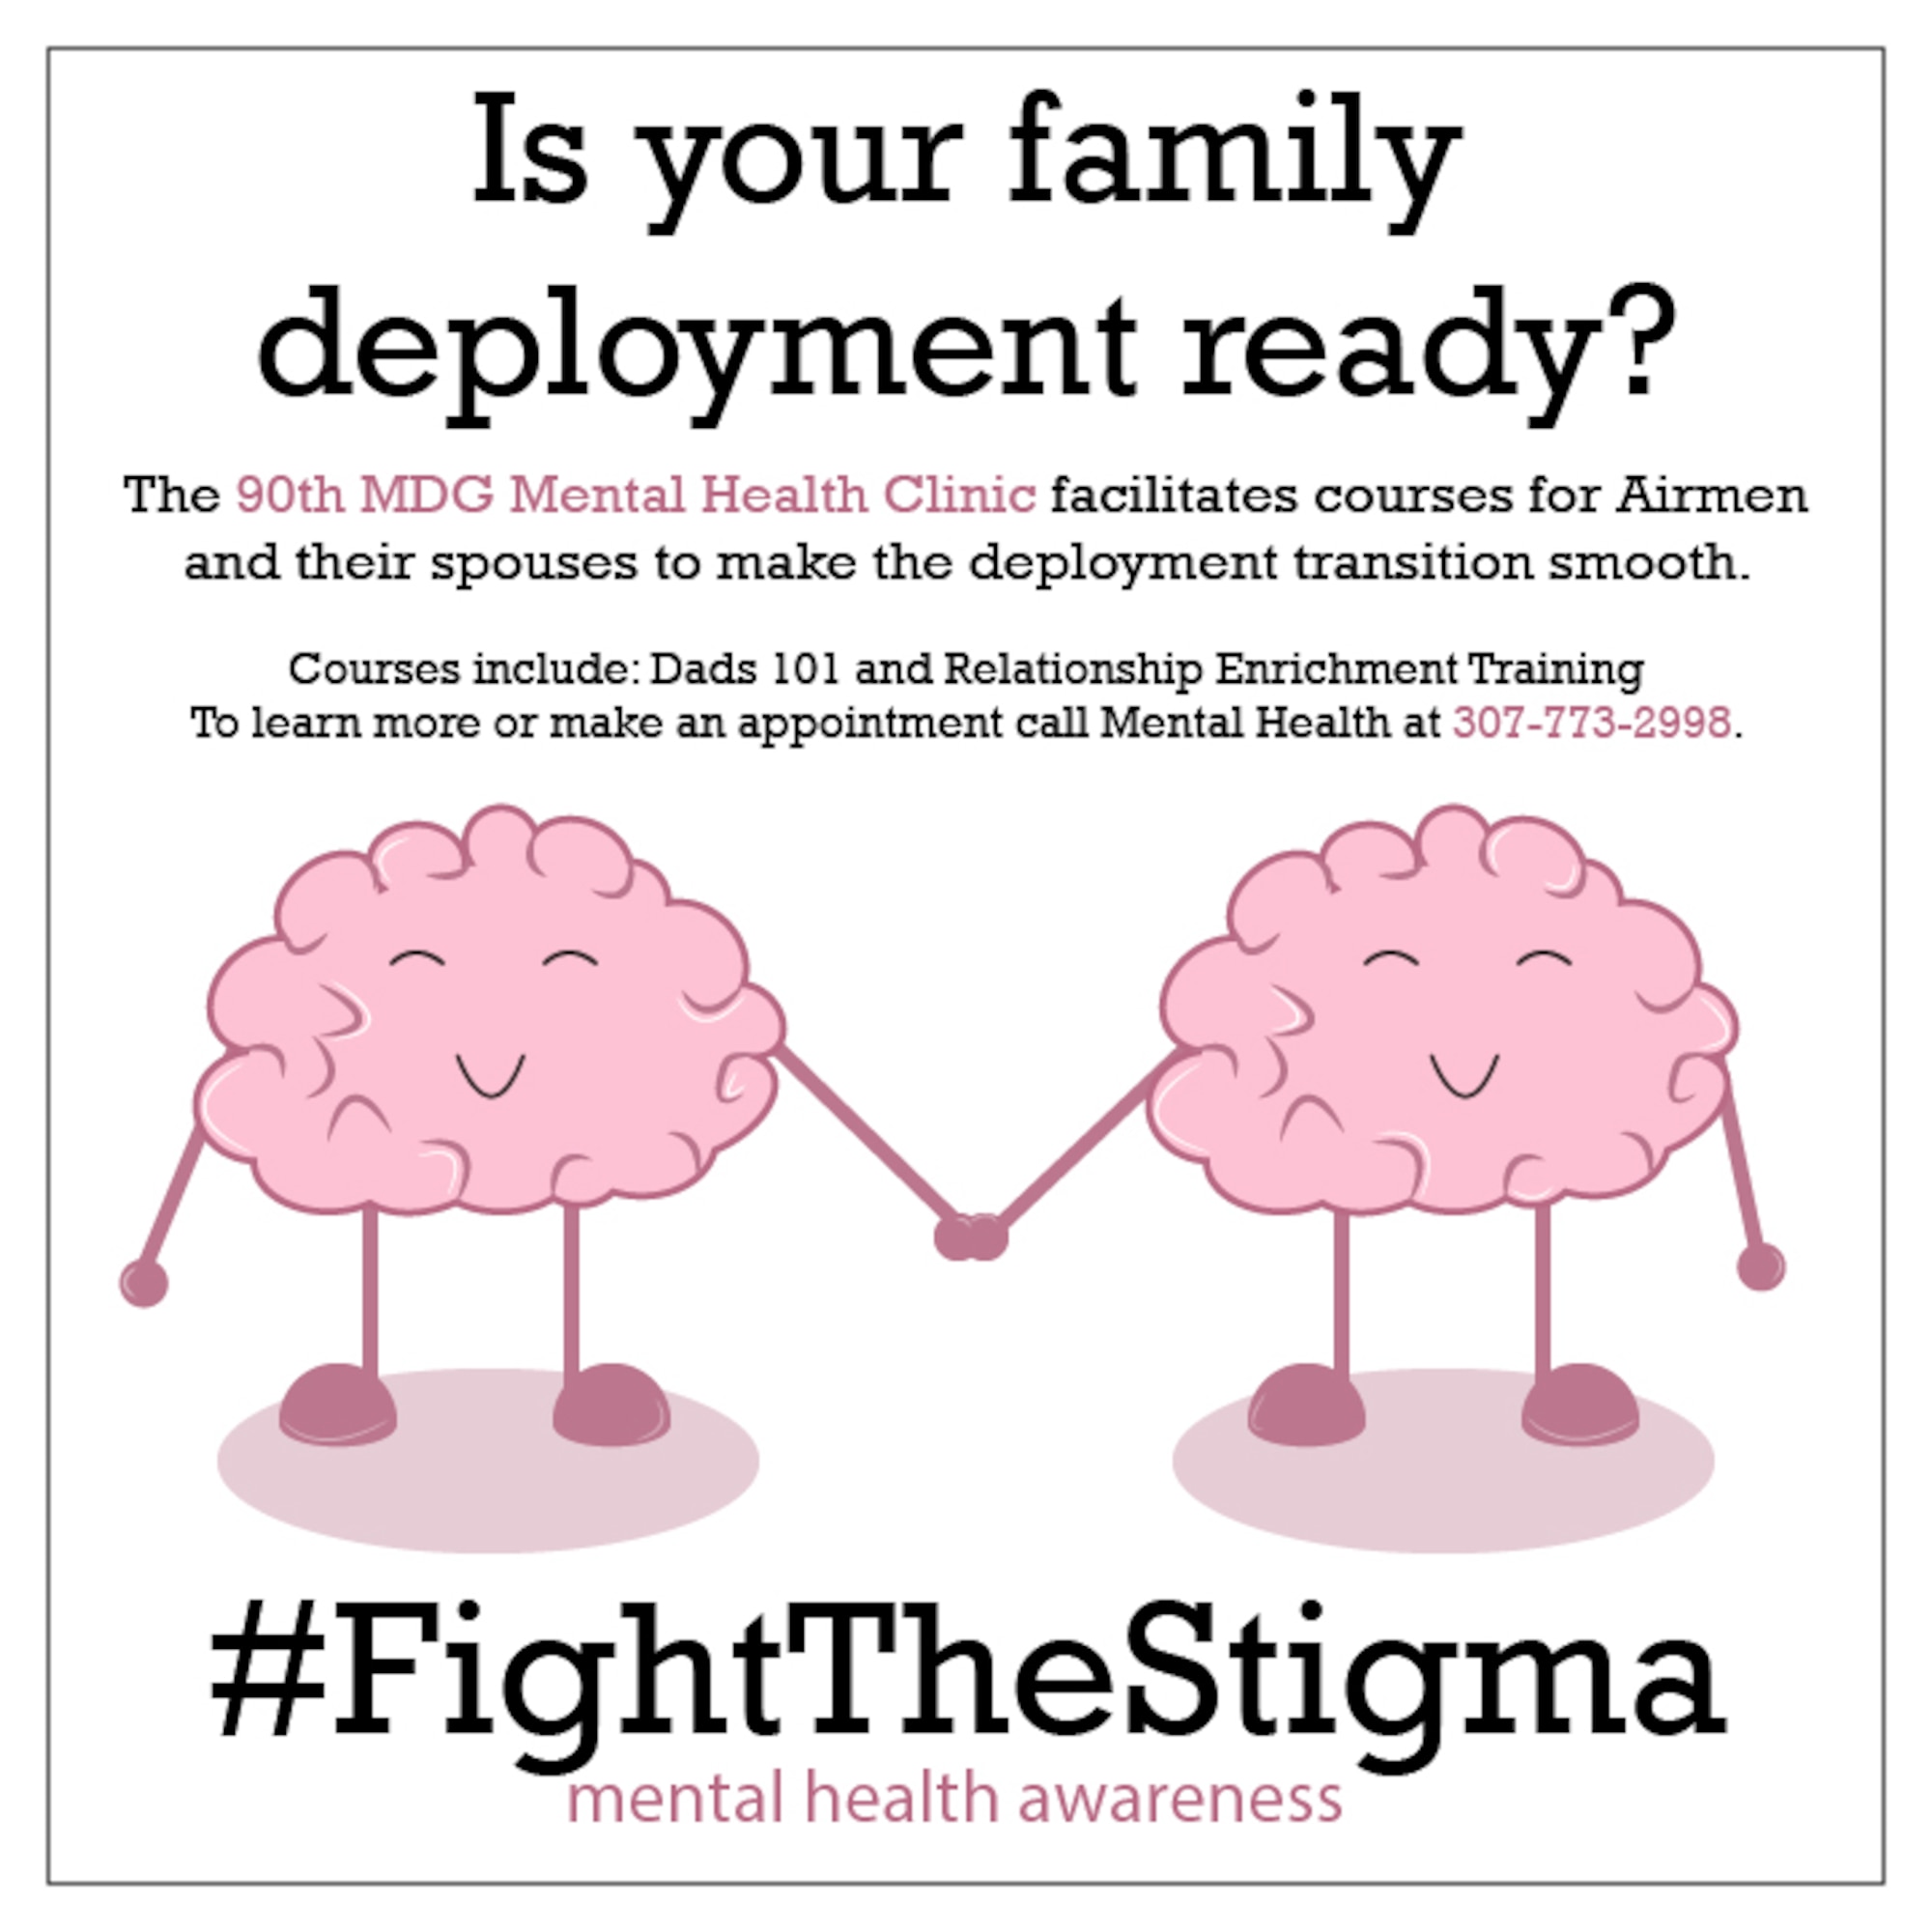 The Fight the Stigma graphic created on June 5, 2019 at F.E. Warren Air Force Base, Wyo., strived to raise awareness for mental health programs established for Airmen and their dependents. If an Airman or their dependent are going through life transitions and would like assistance, seek help and fight the stigma. (U.S. Air Force Illustration created by Senior Airman Abbigayle Williams)(Created using Adobe Illustrator)